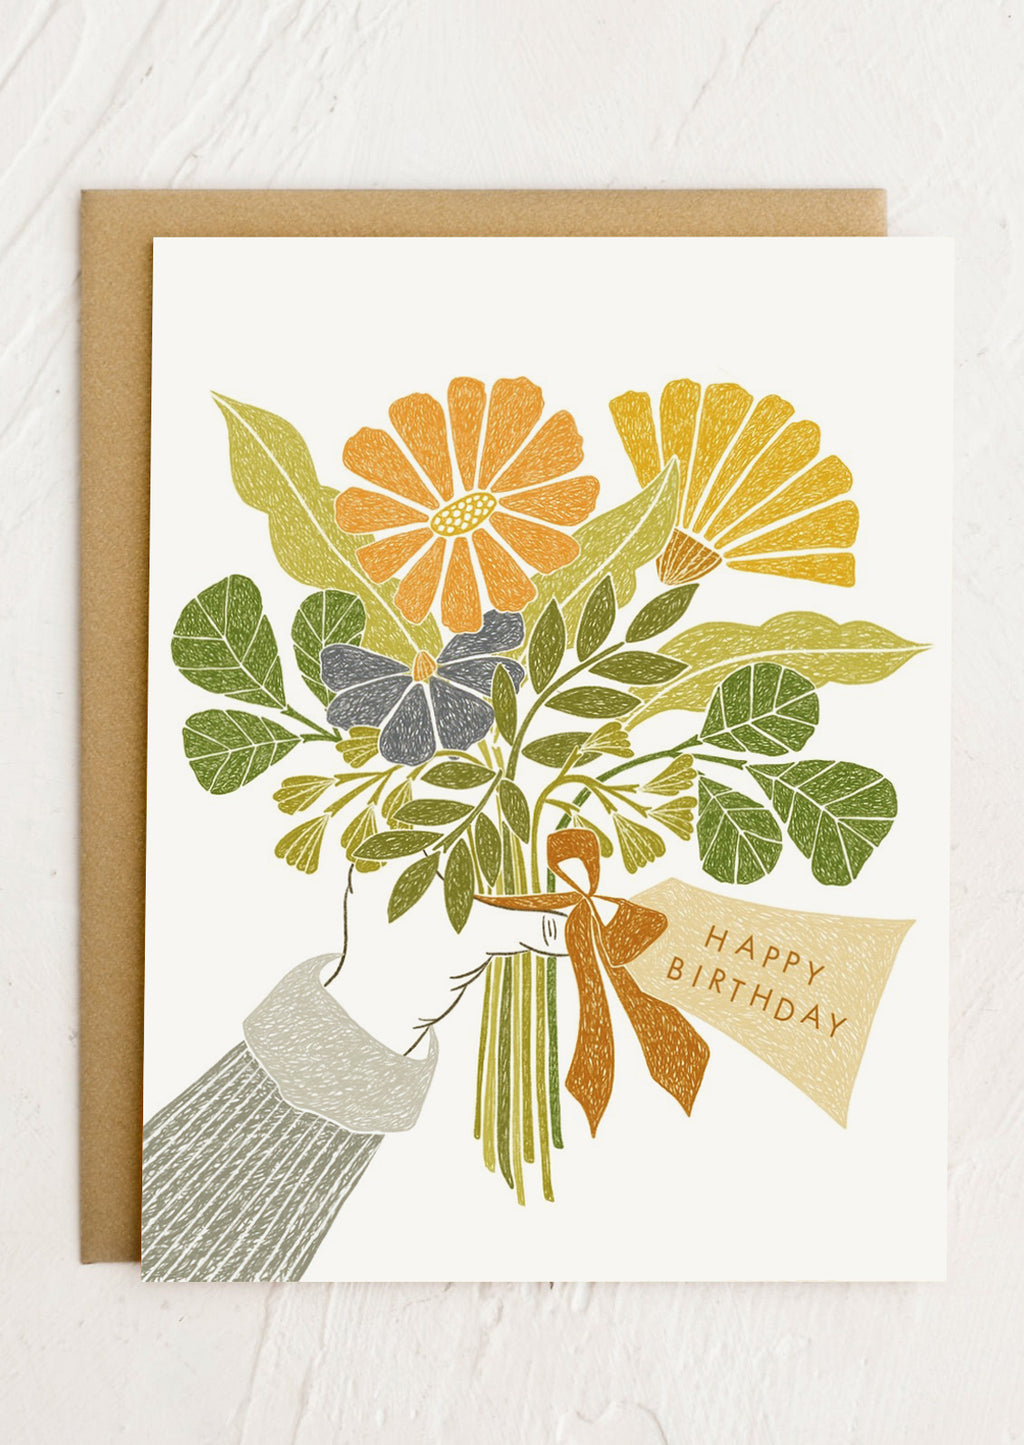 1: A digital print illustrated card with human hand holding bouquet of flowers and text reads "Happy Birthday".